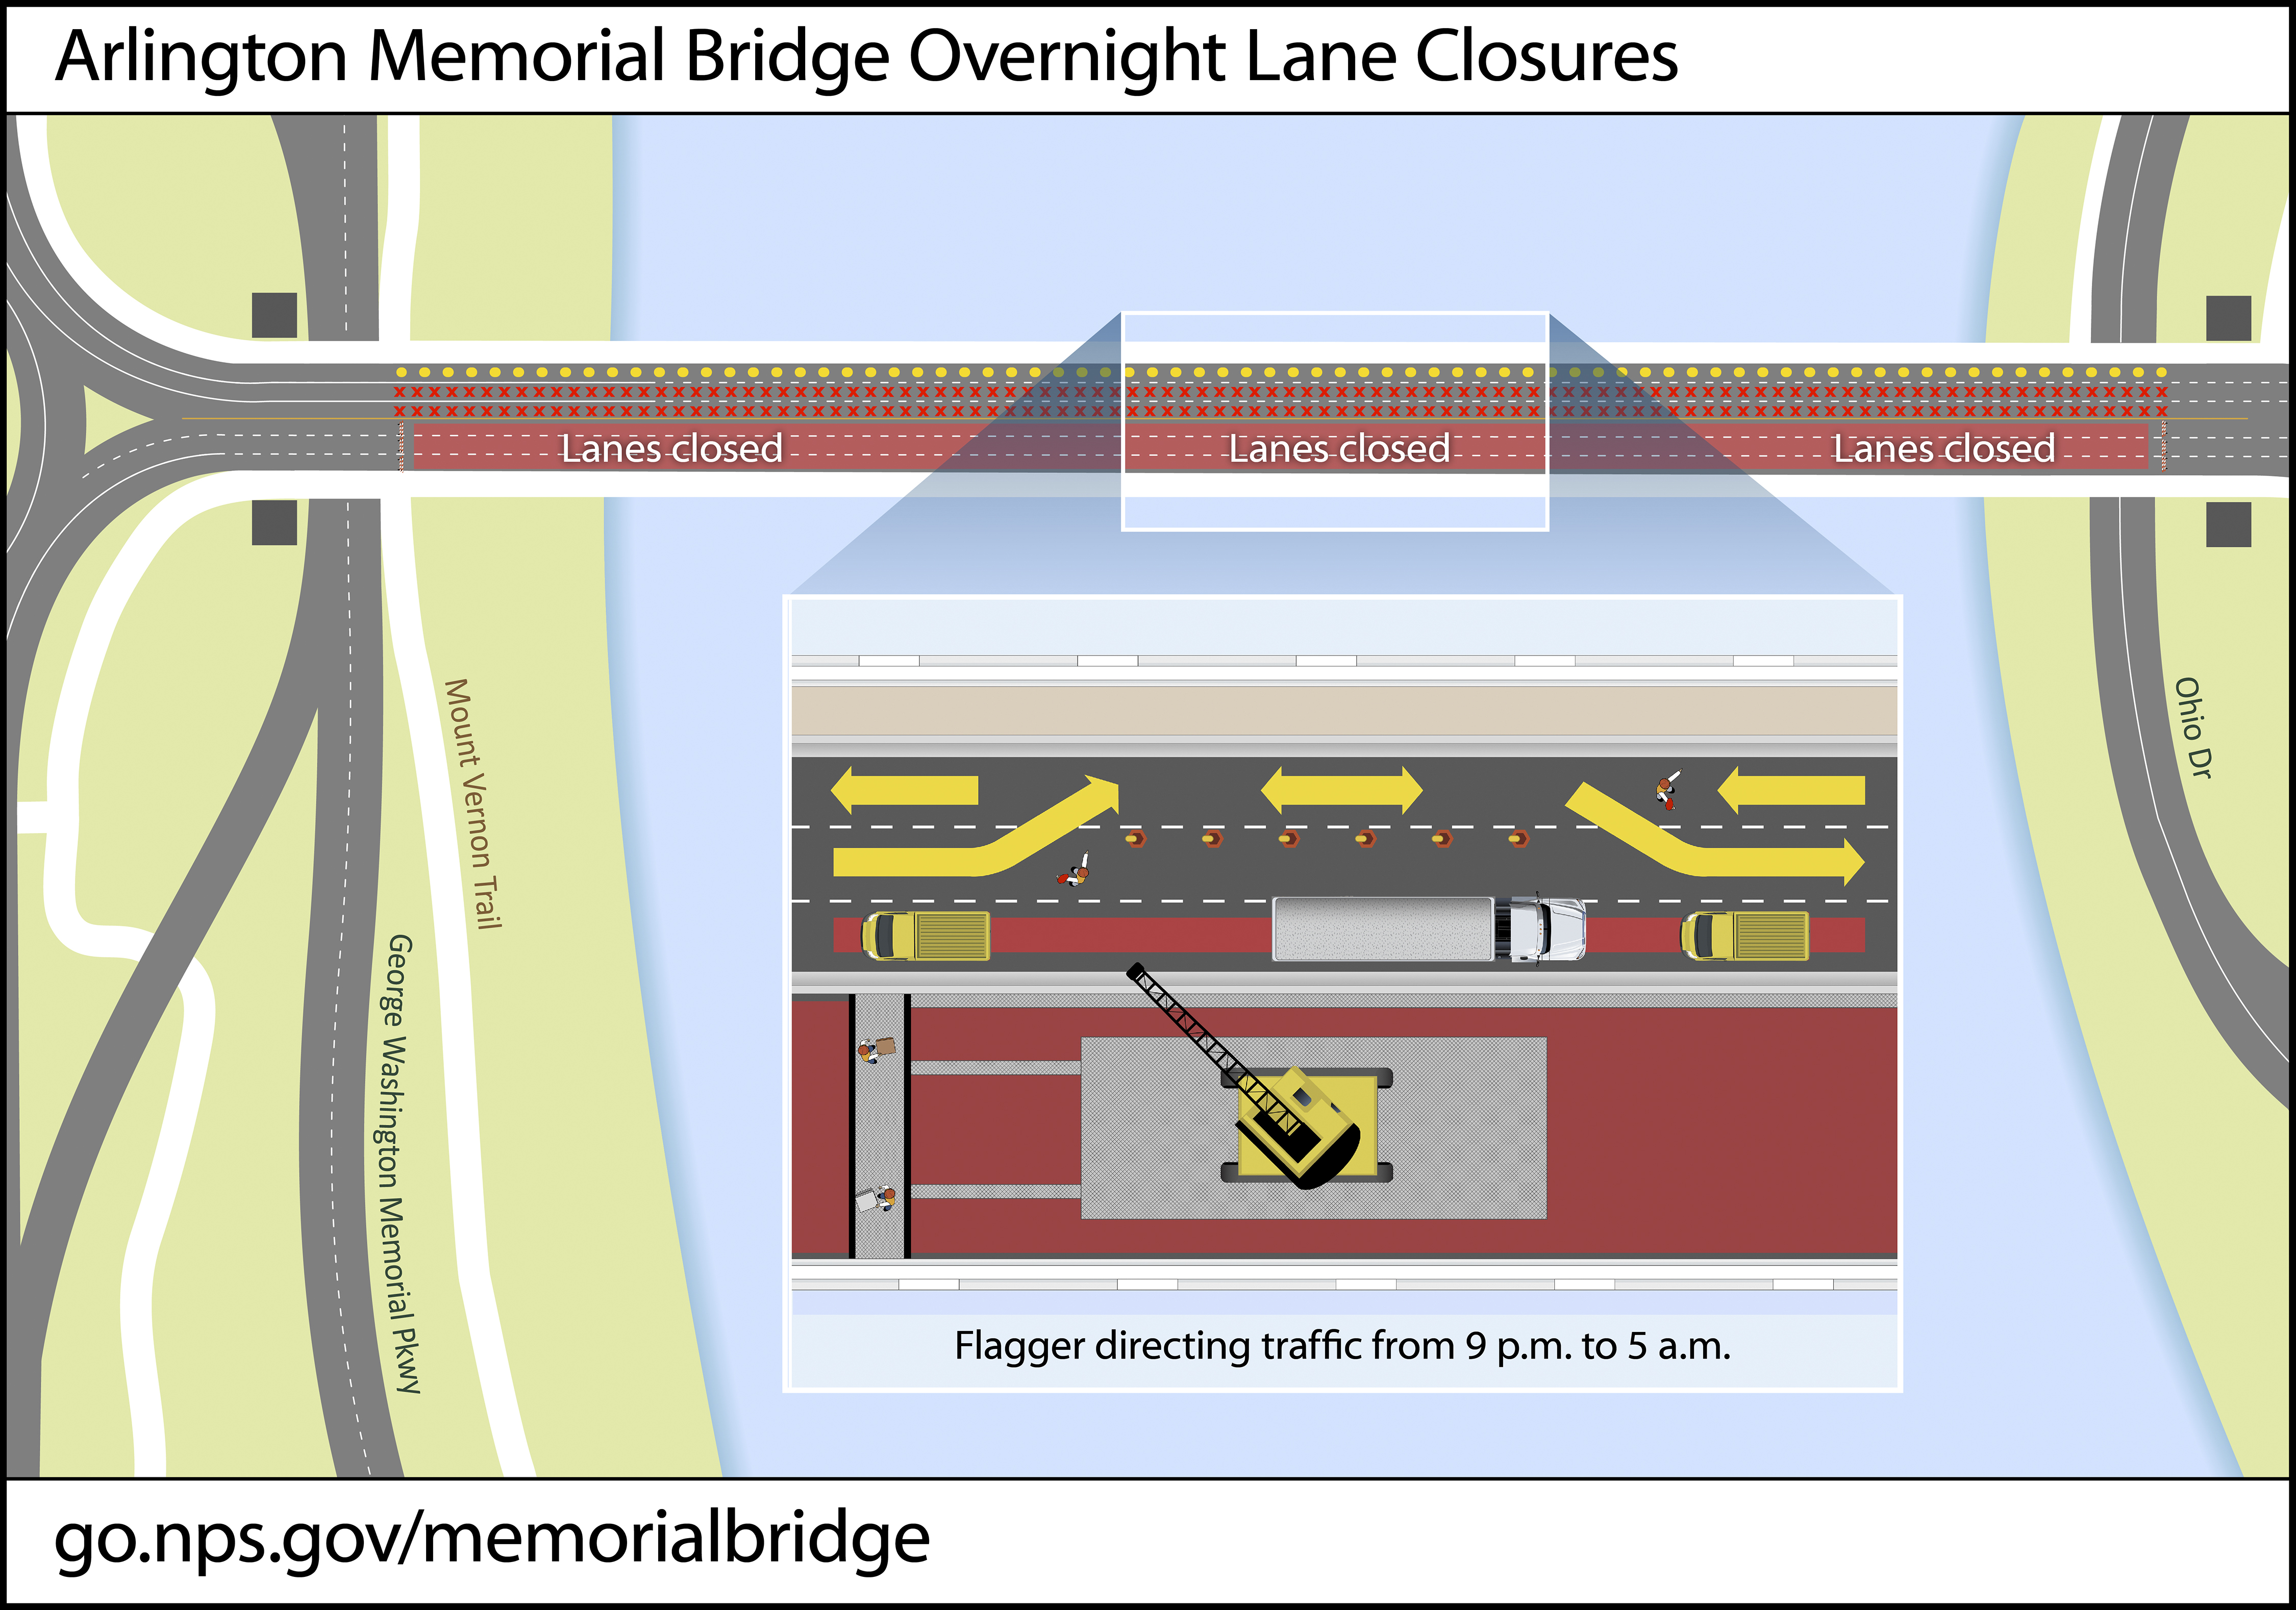 Surface of Arlington Memorial Bridge with two closed lanes and flagger directing drivers.